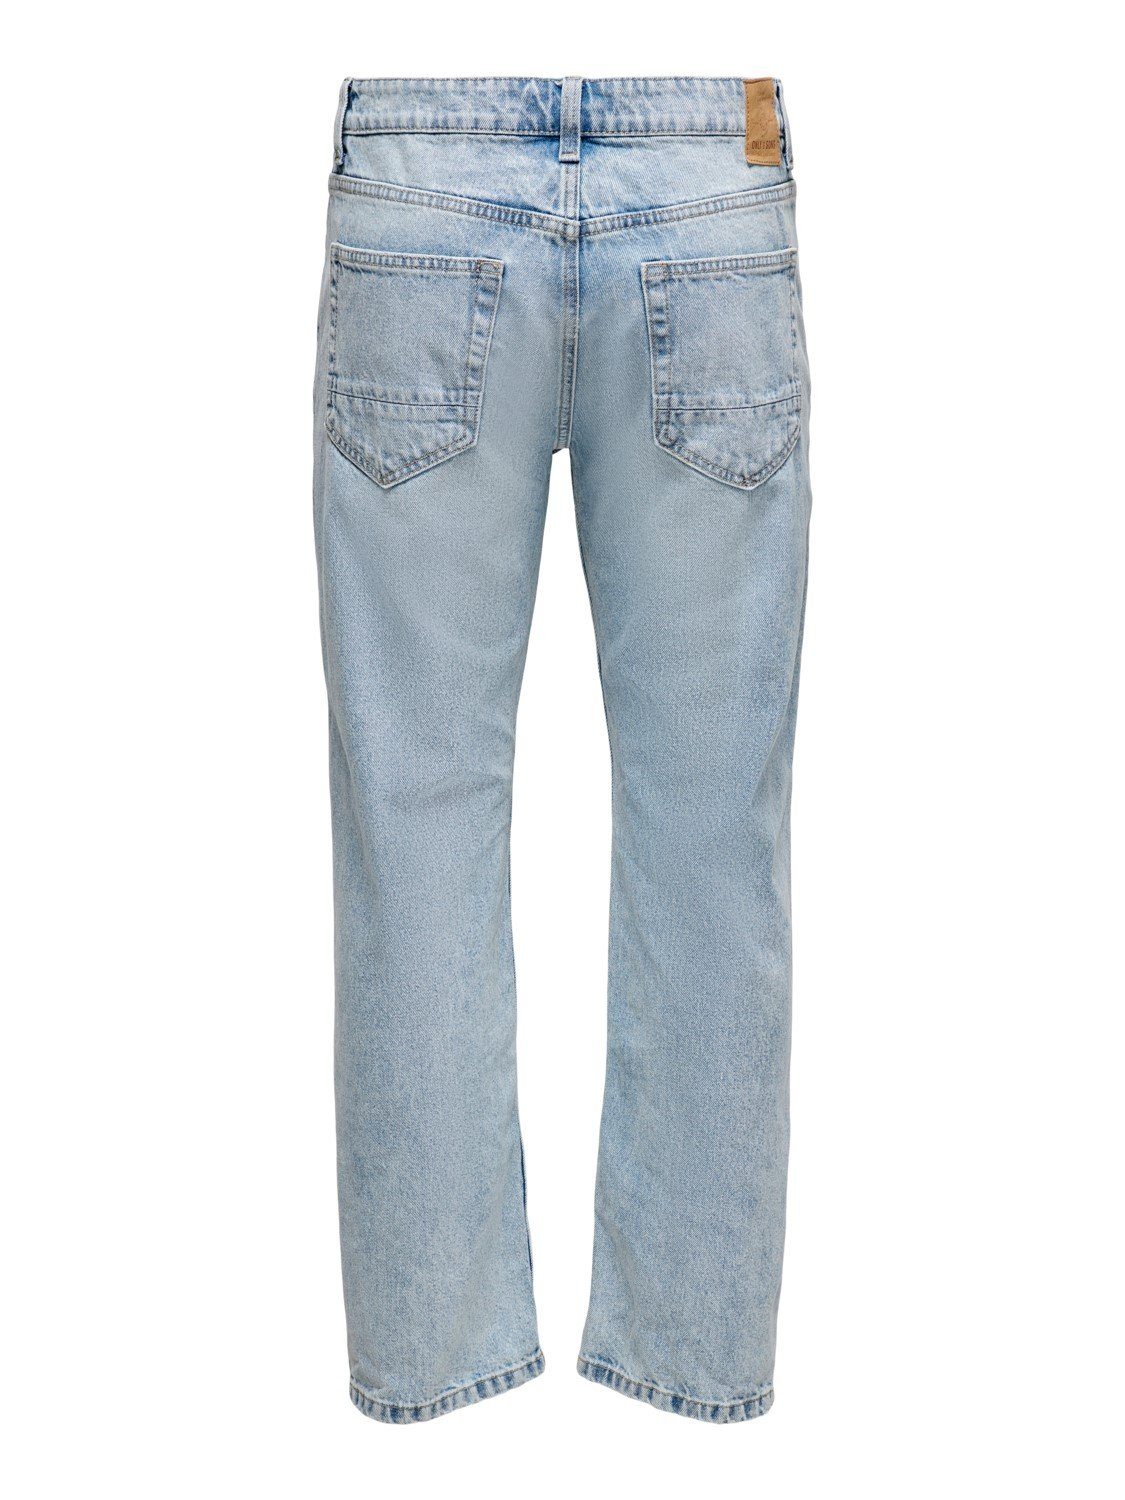 ONLY & SONS Relax-fit-Jeans ONSEDGE Baumwolle aus